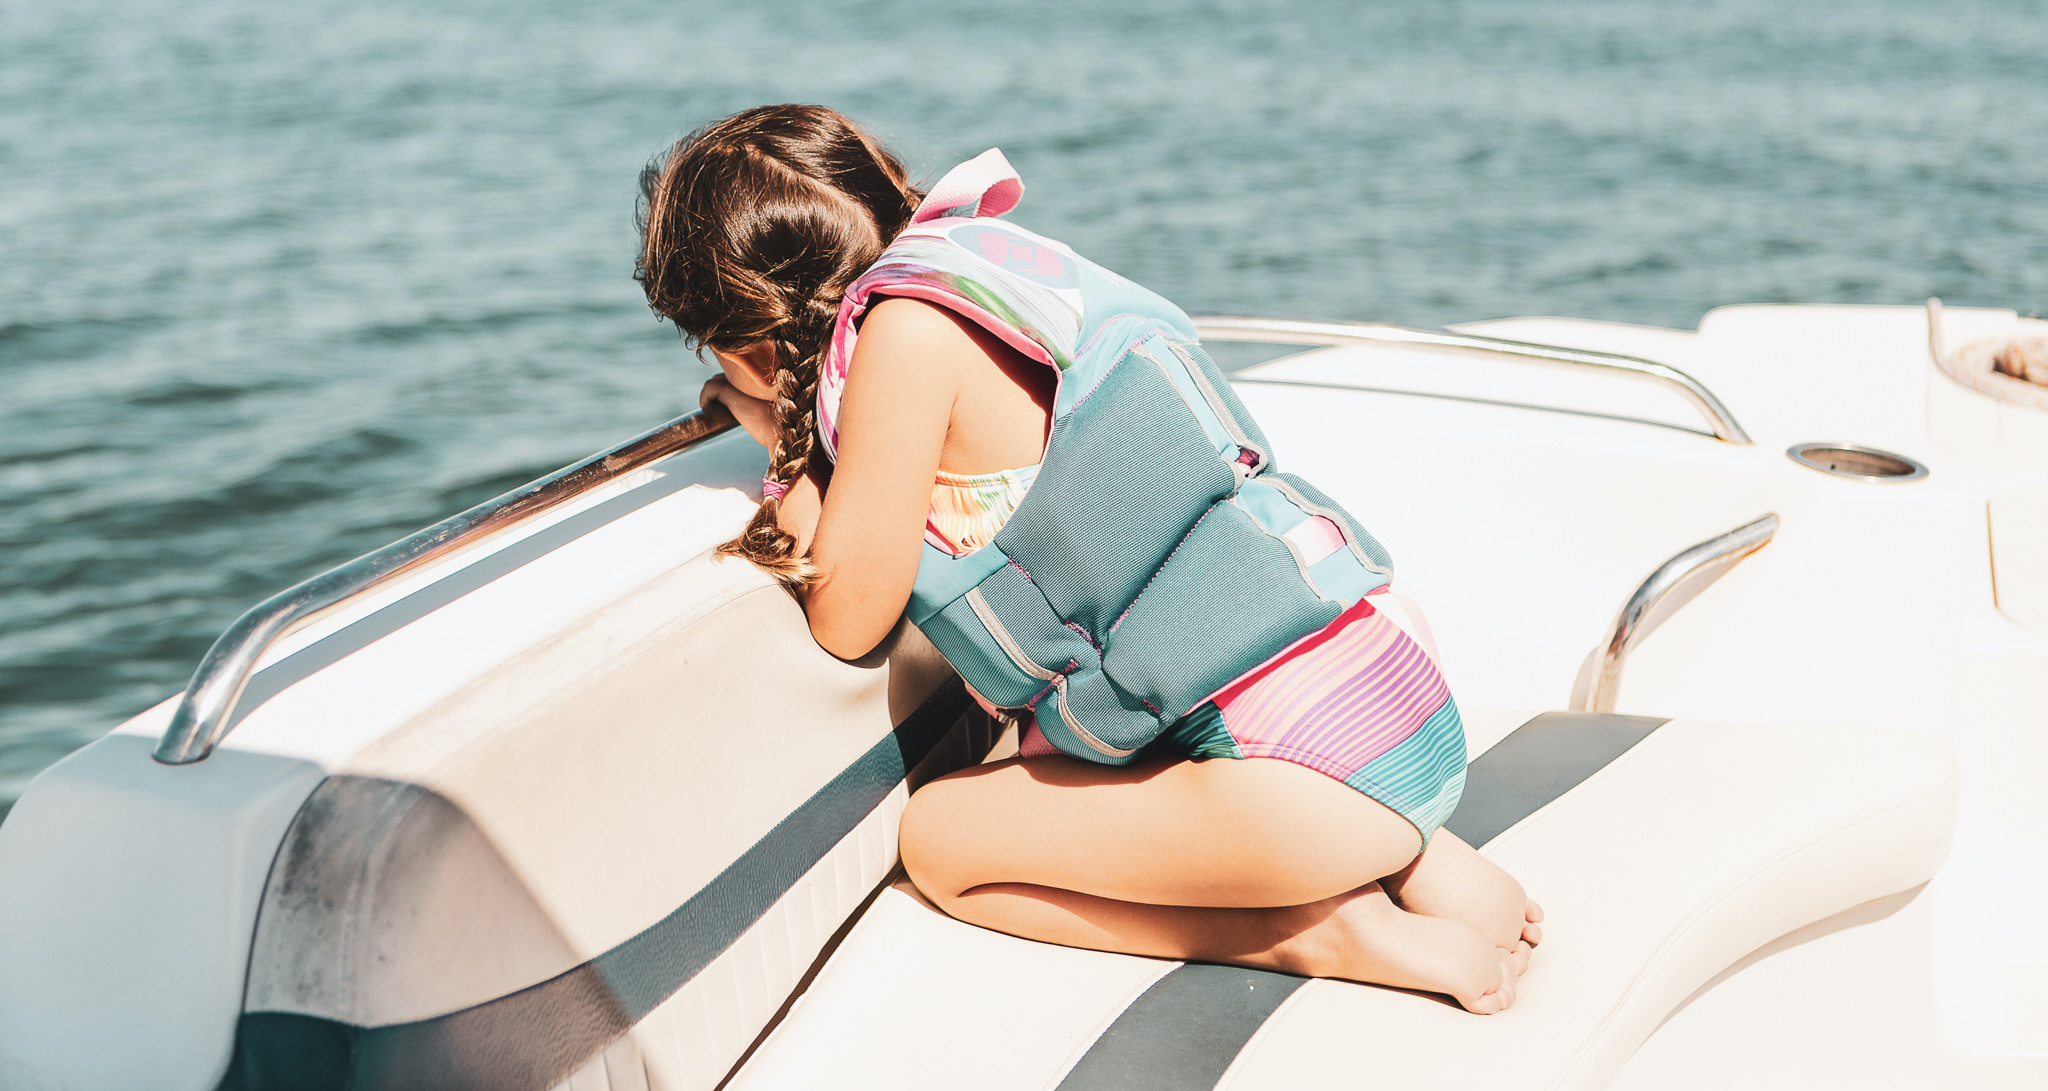 Cleaning Boat Seats: How to Clean Boat Seats Step-by-Step